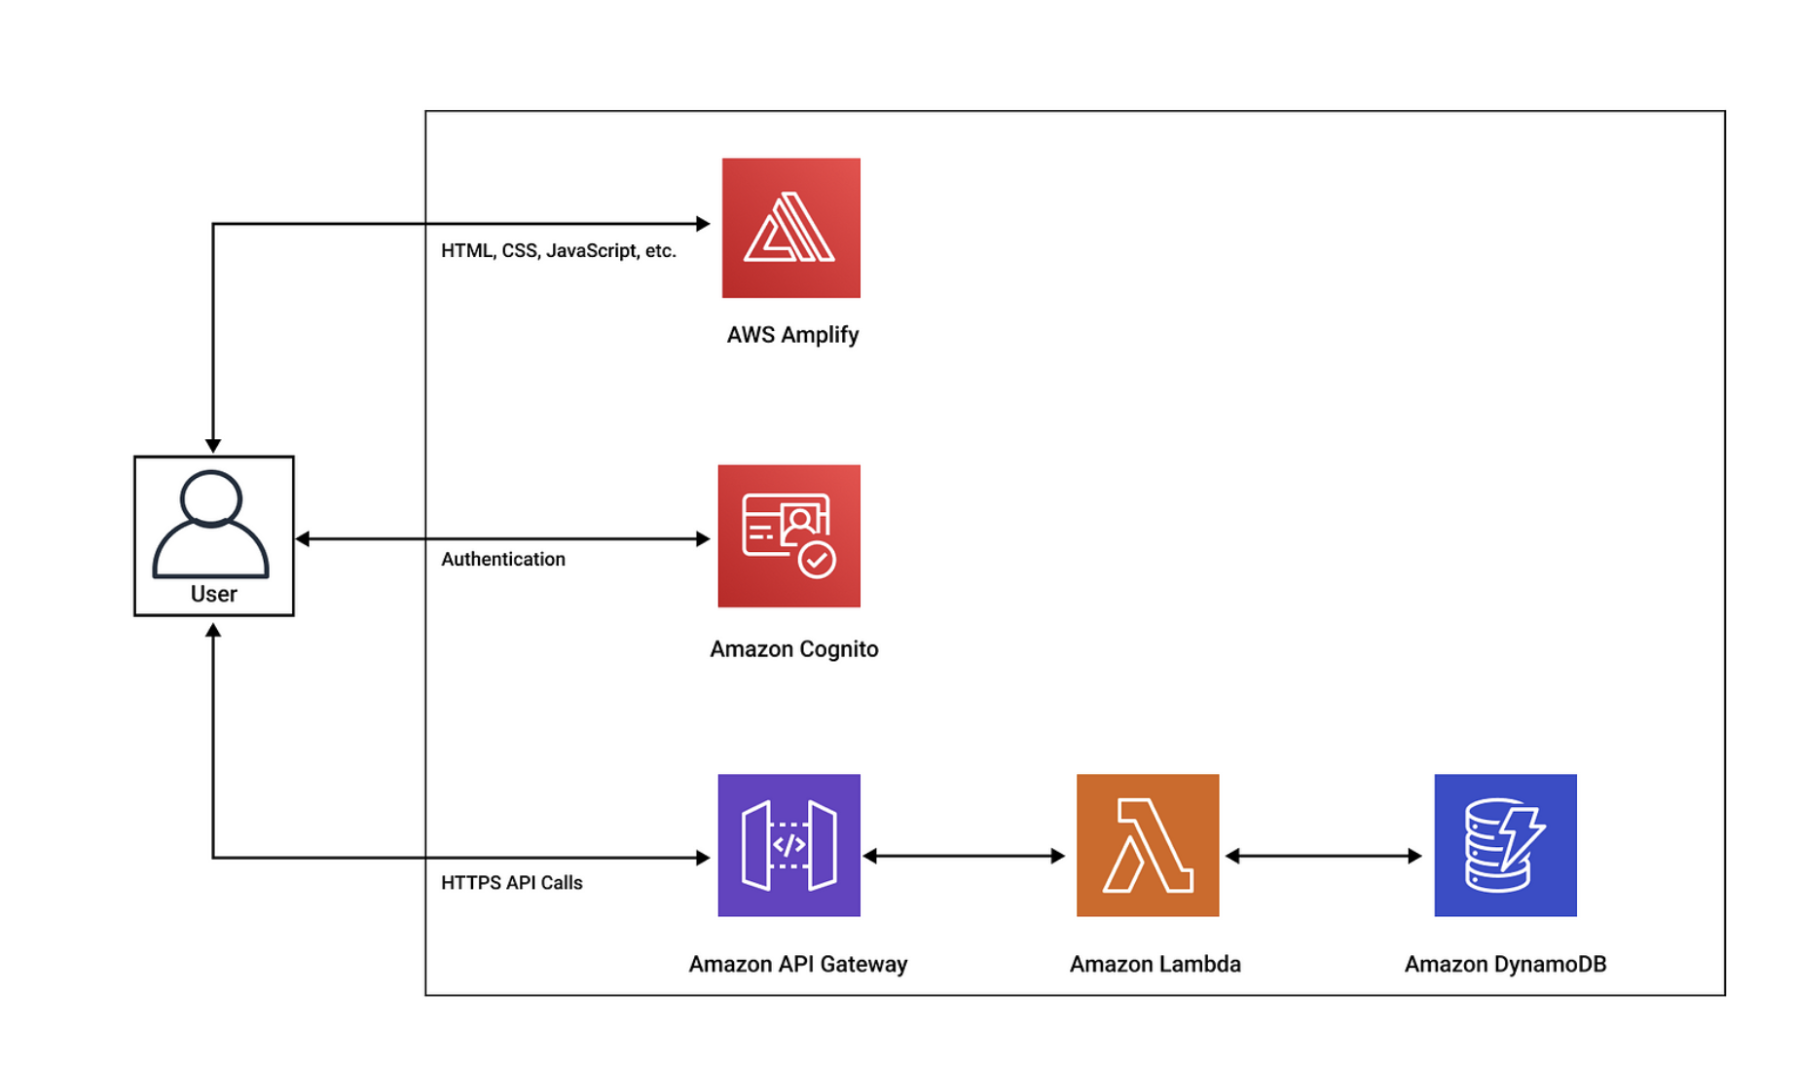 System diagram of DynamoDB being used in a serverless setup with AWS Lambda, Amplify and Cognito.